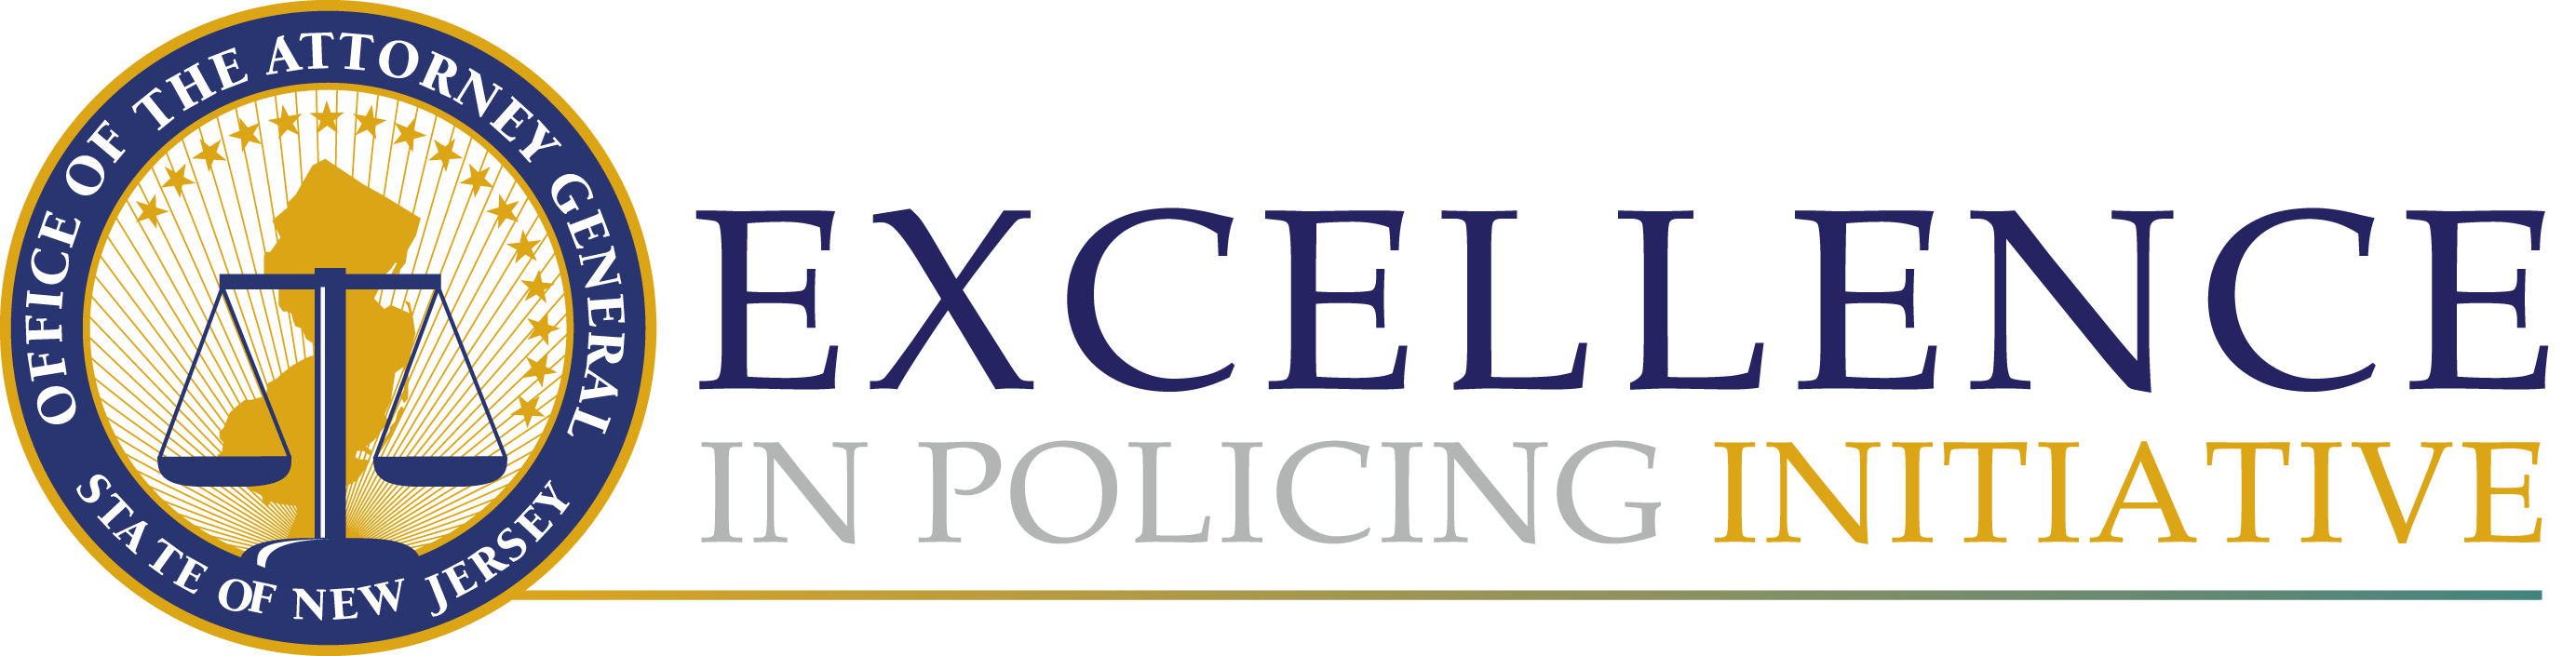 Excellence in Policing